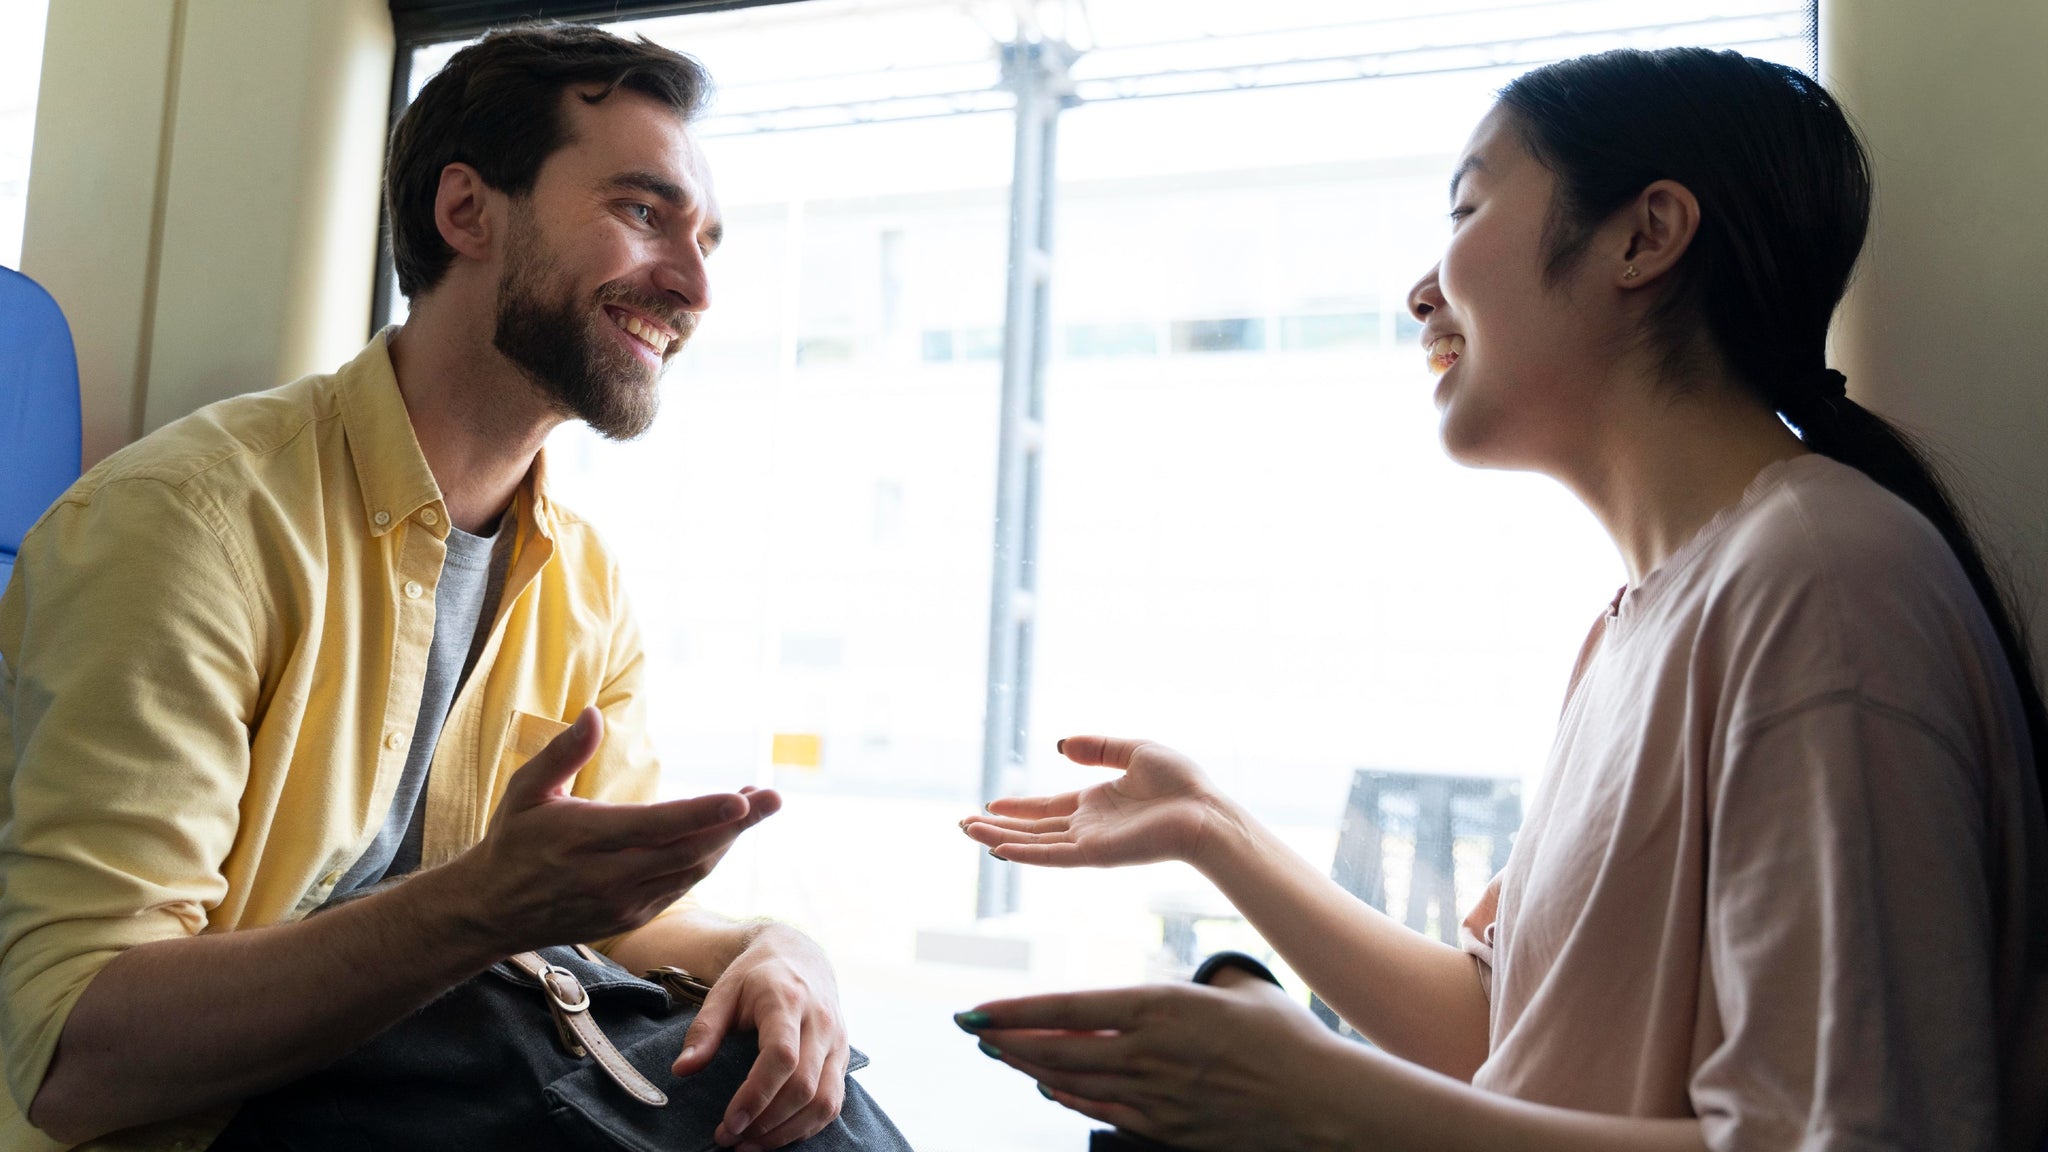 The Art of Active Listening in Relationships